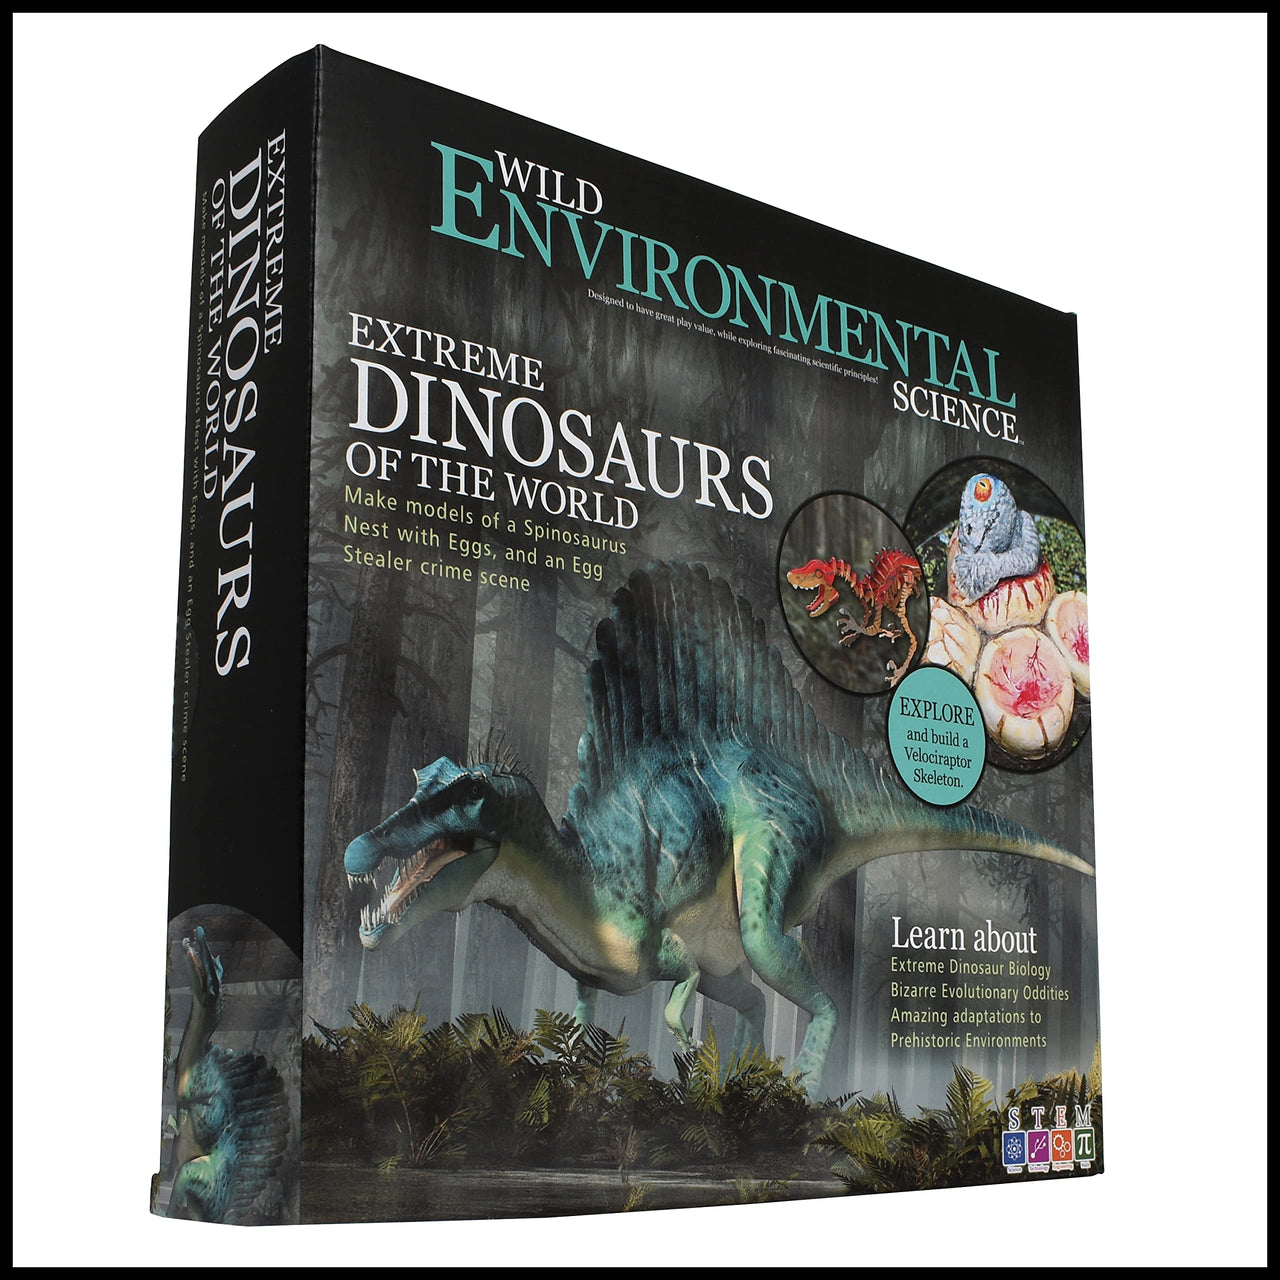 Wild Environmntal Science Extreme Dinosaurs of the World